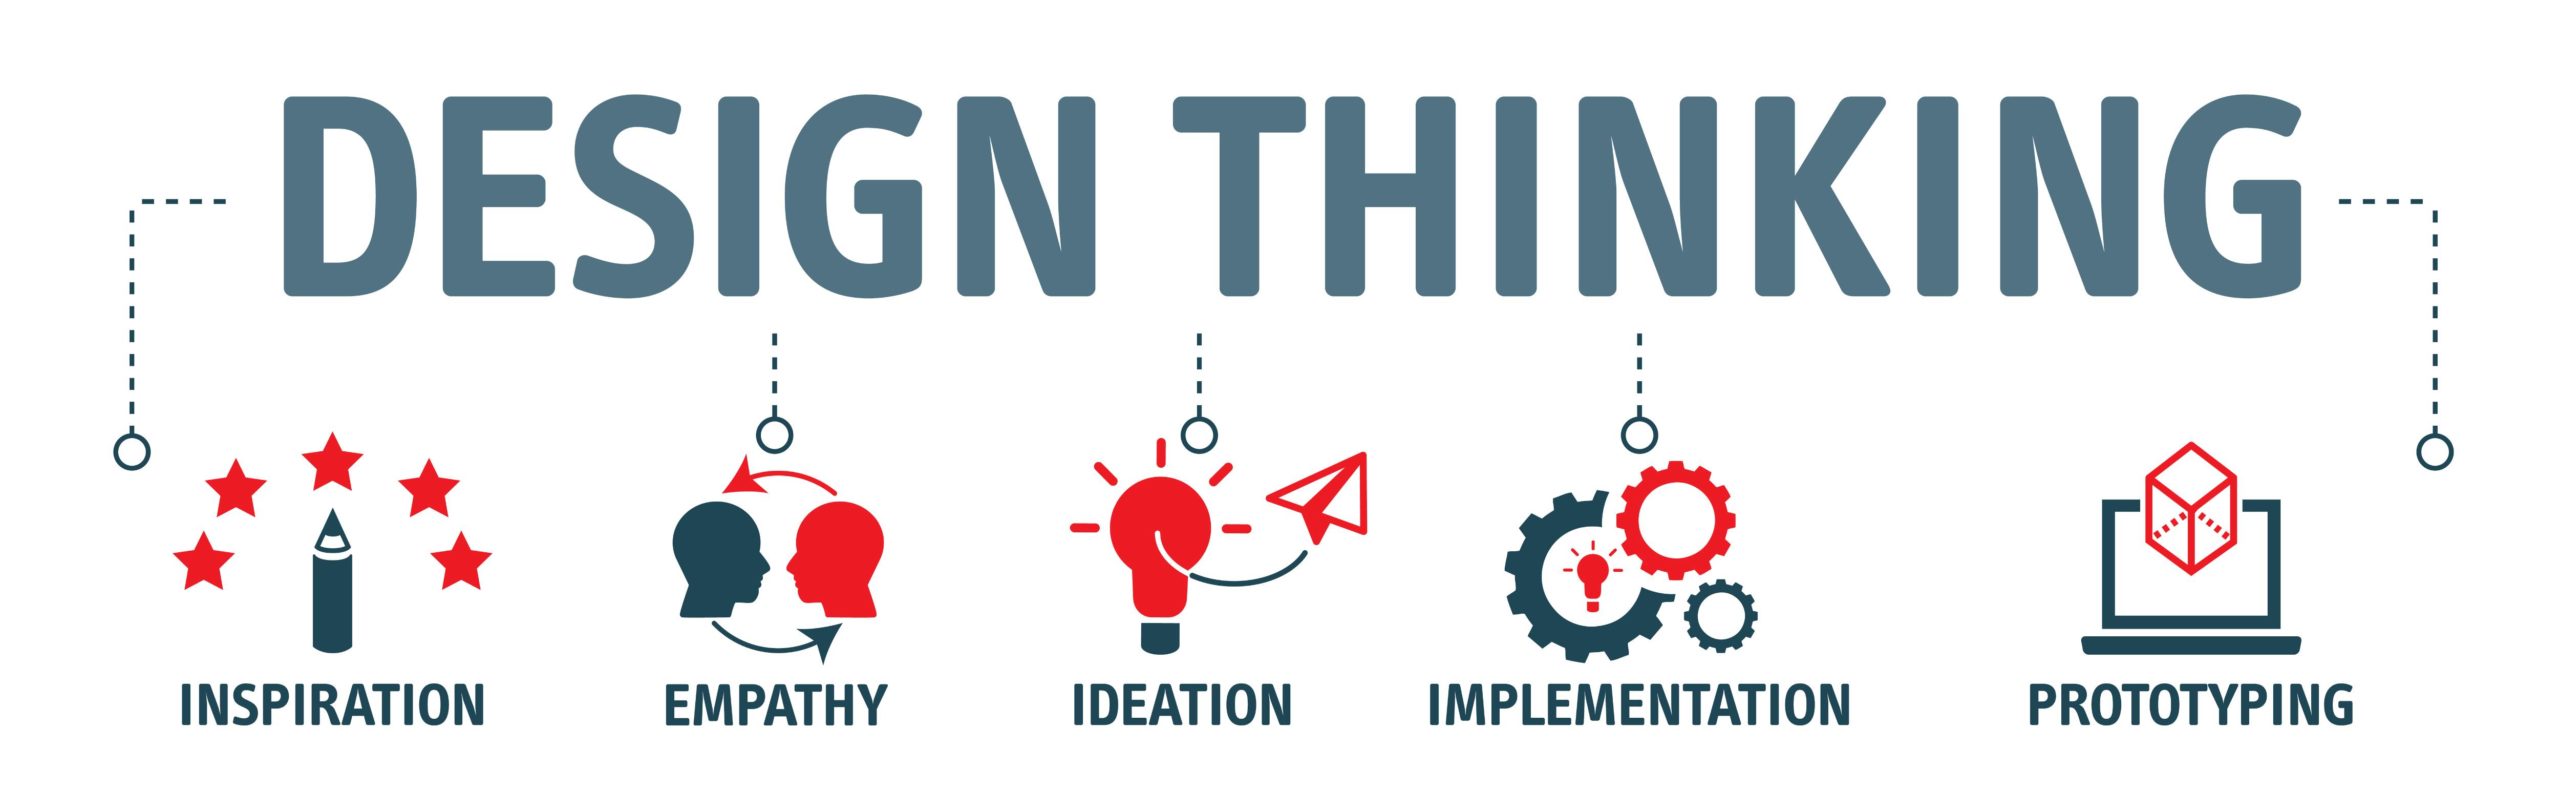 agence création design thinking